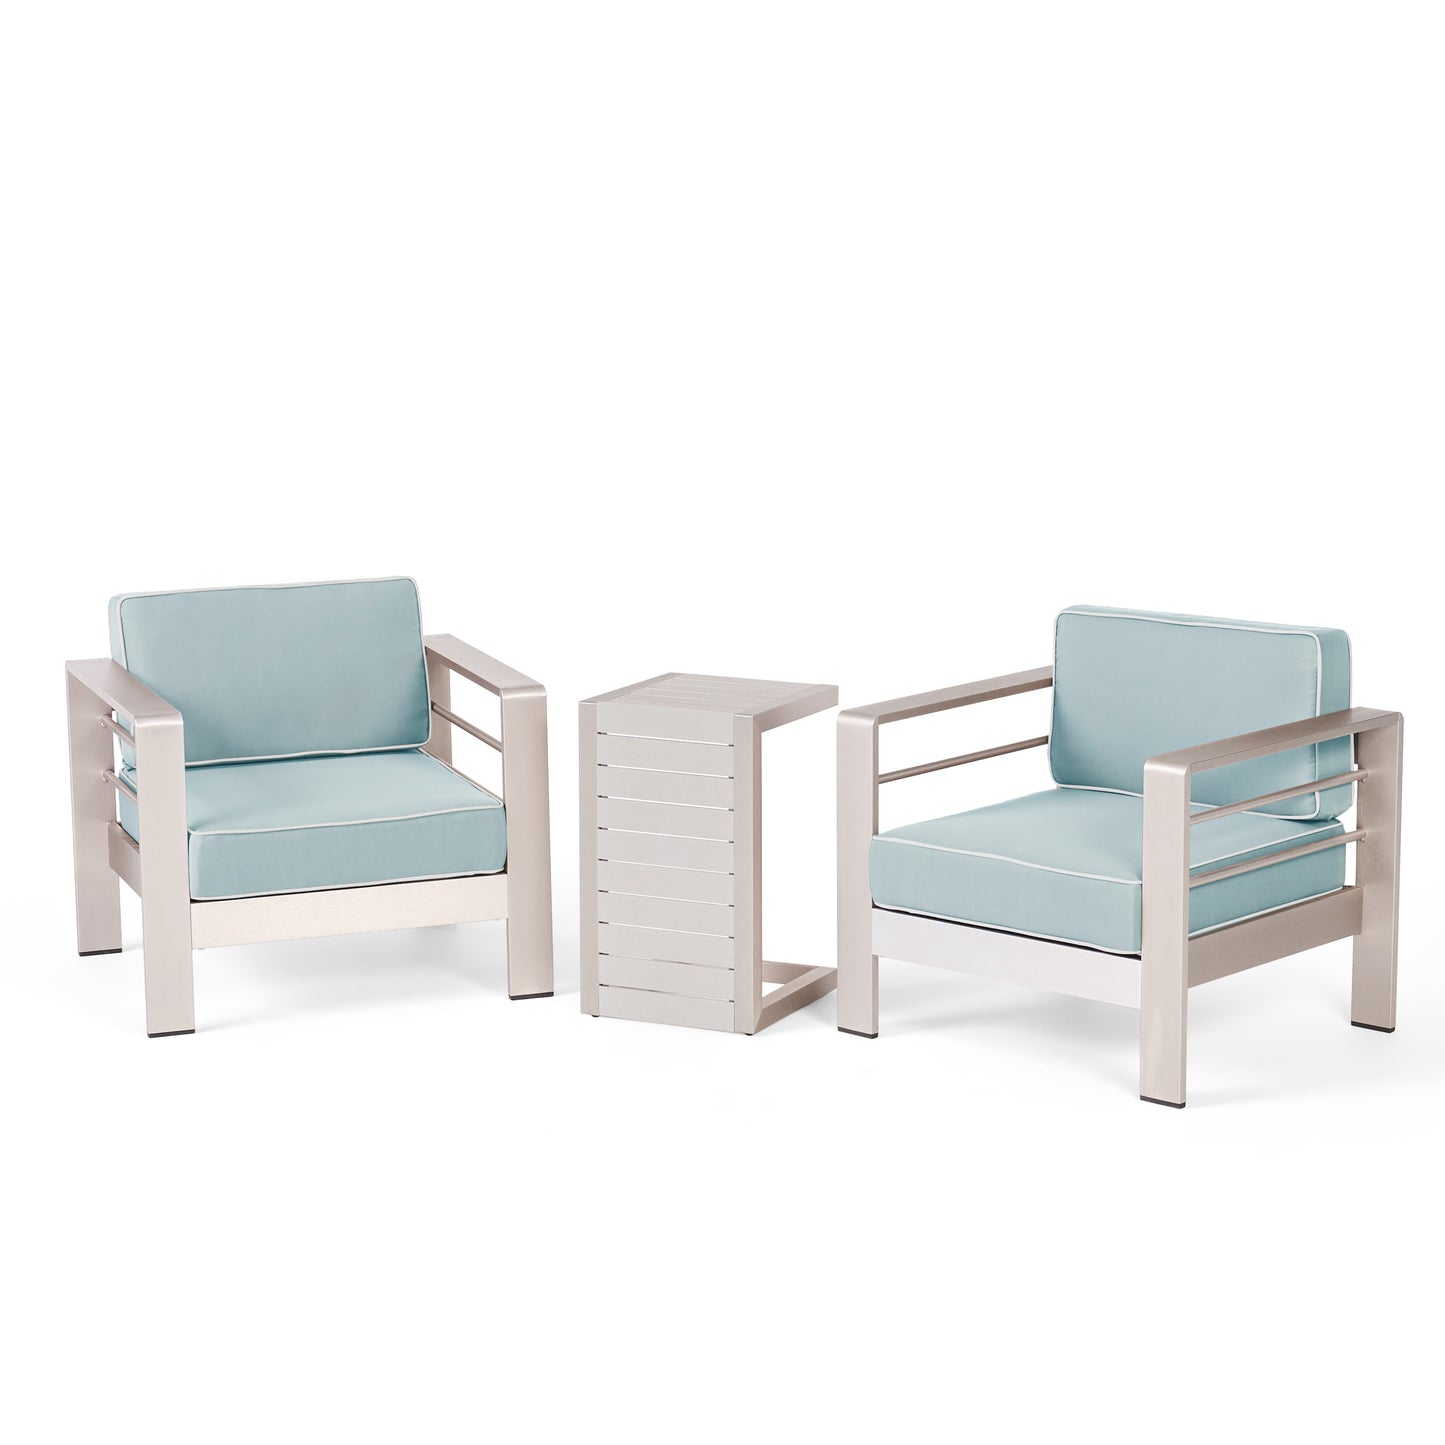 Crested Bay Outdoor 3 Piece Aluminum Framed Chat Set with Wicker C-Shaped Side Table